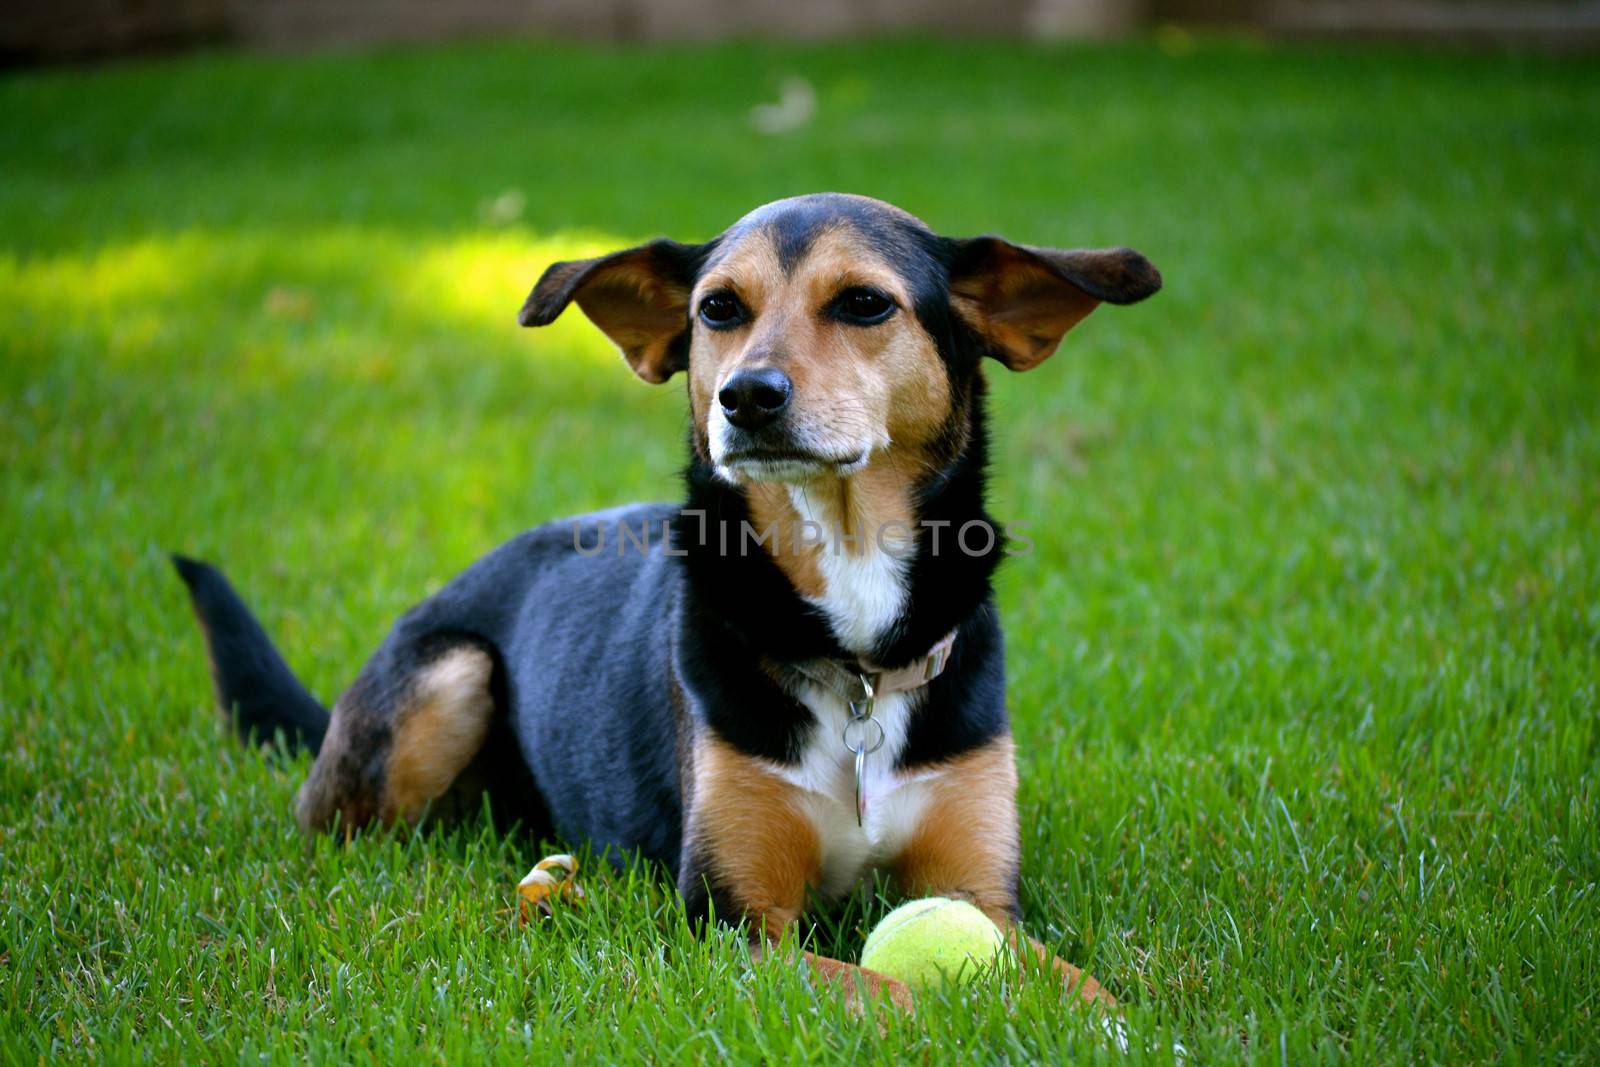 Meagle - Min-Pin Beagle Mixed Breed Dog by RefocusPhoto